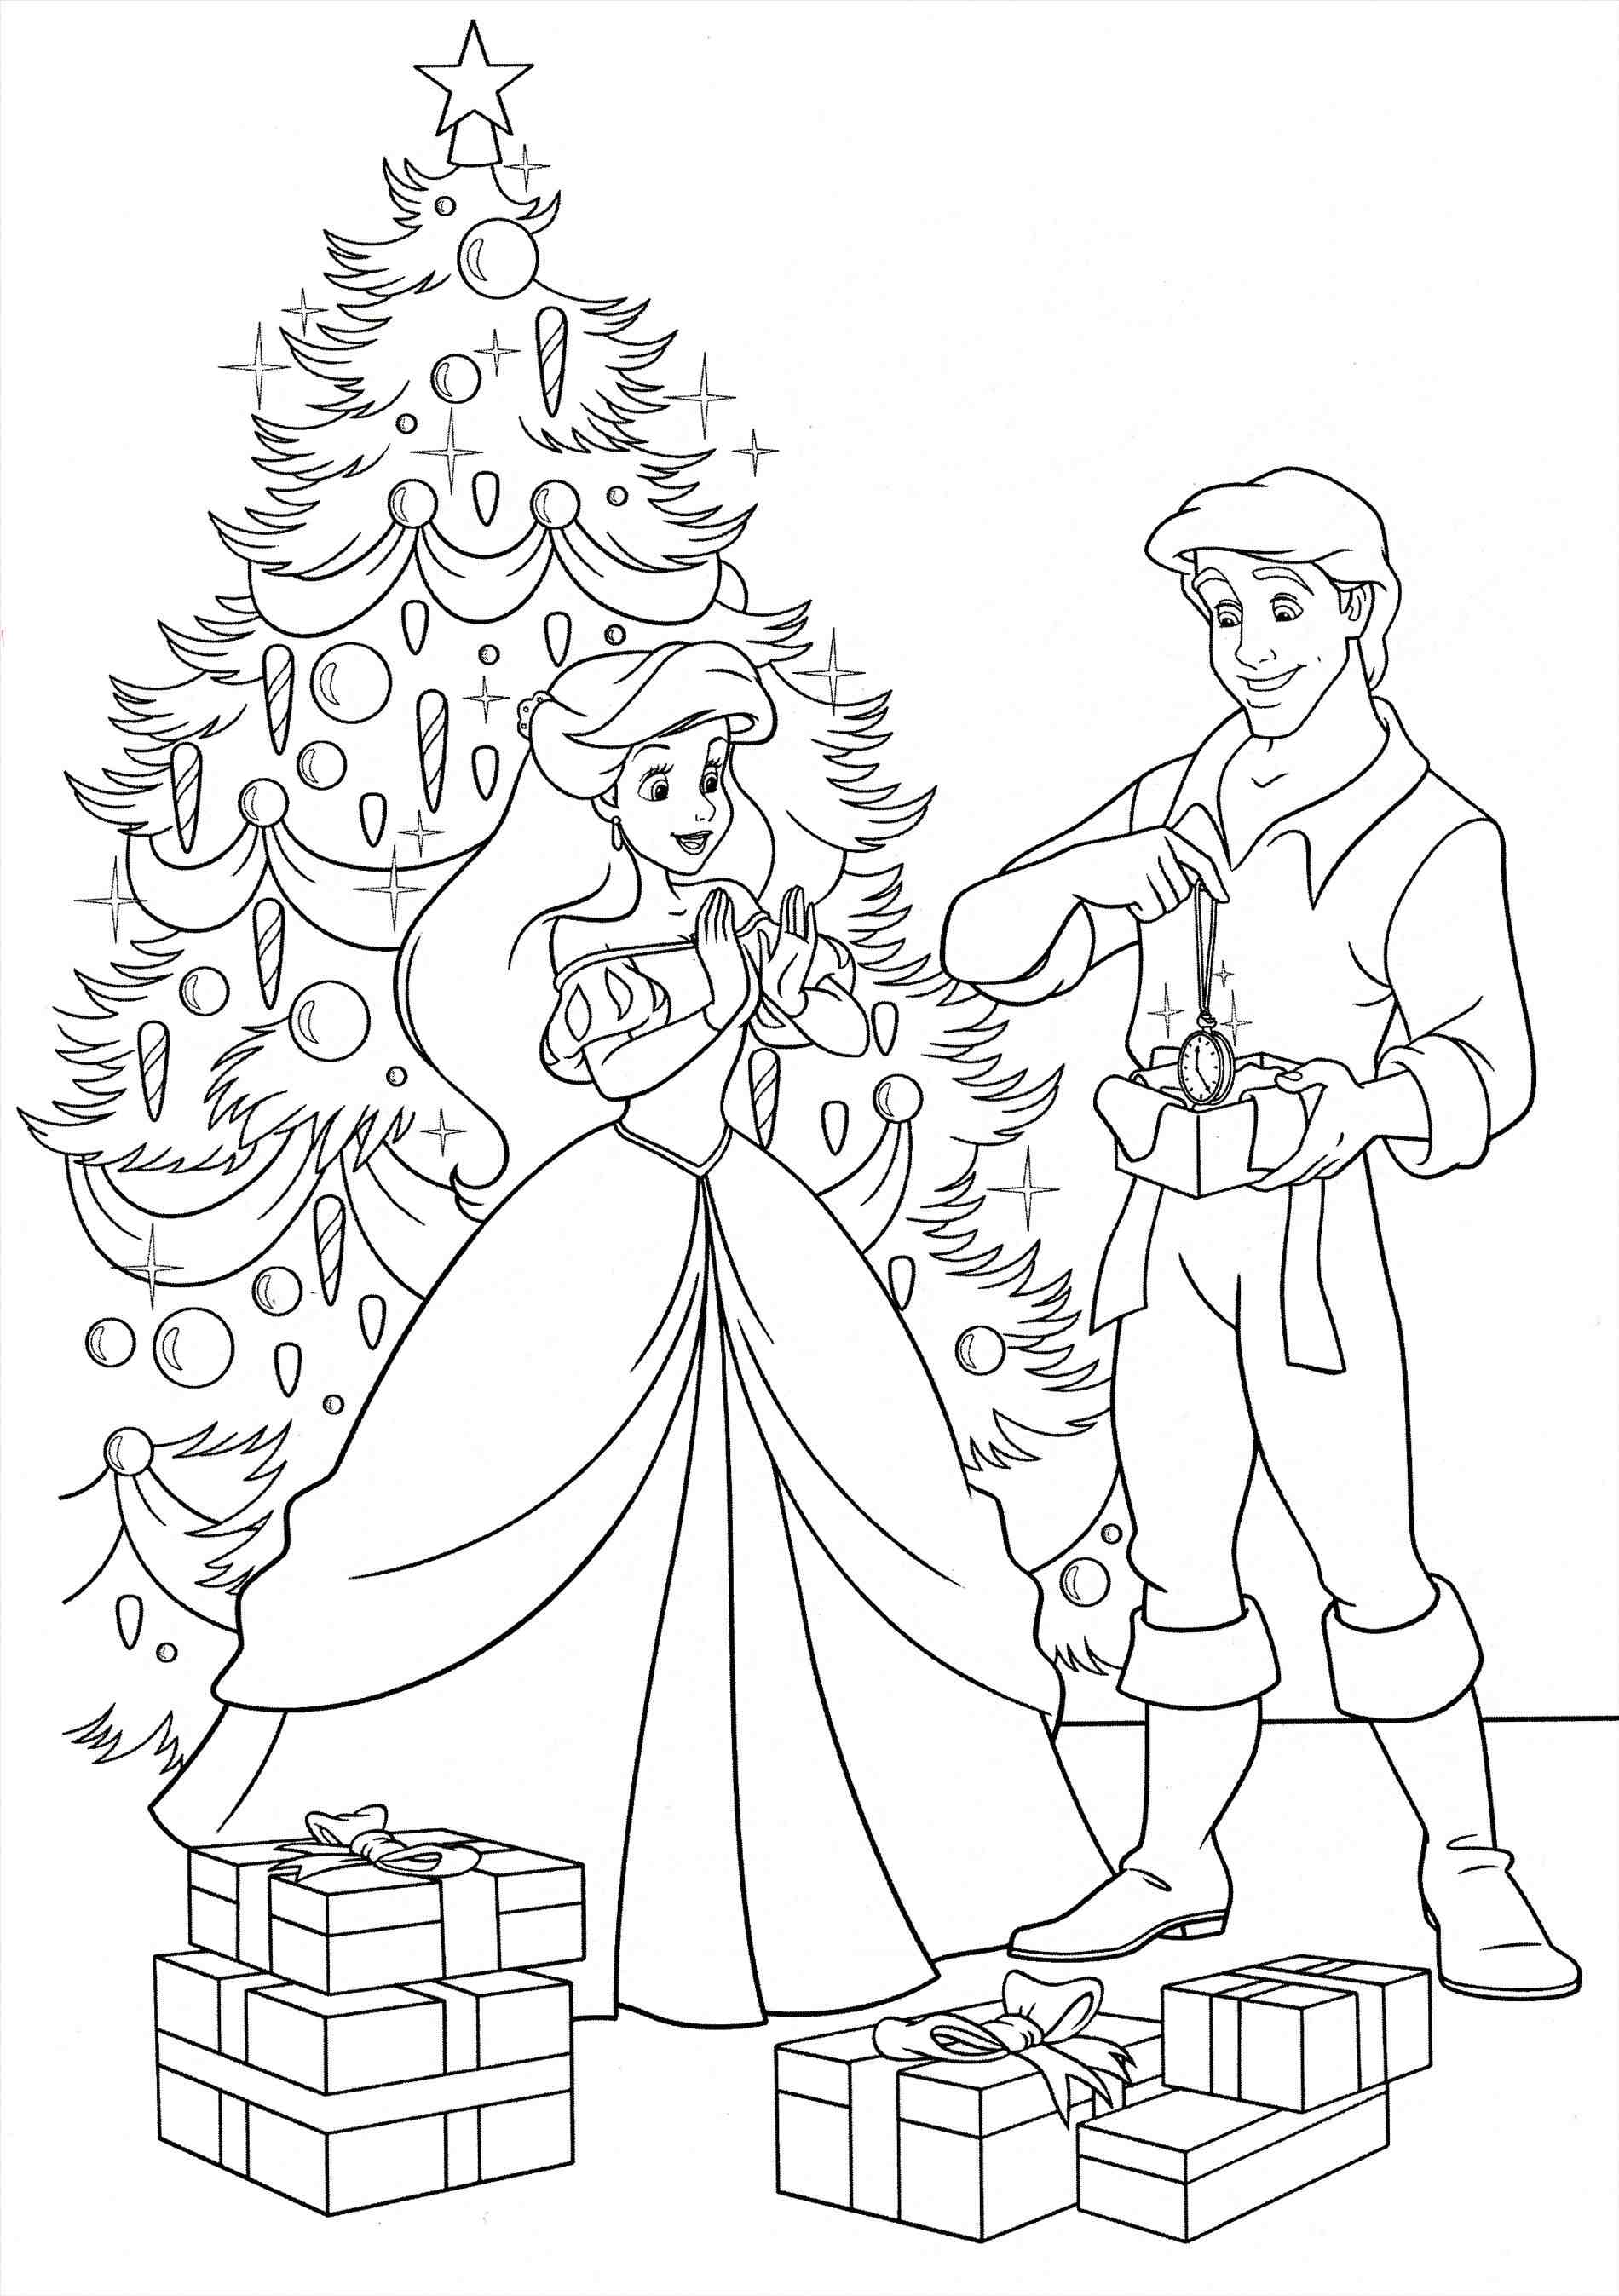 Free Christmas Coloring Pages Disney at GetColorings.com | Free